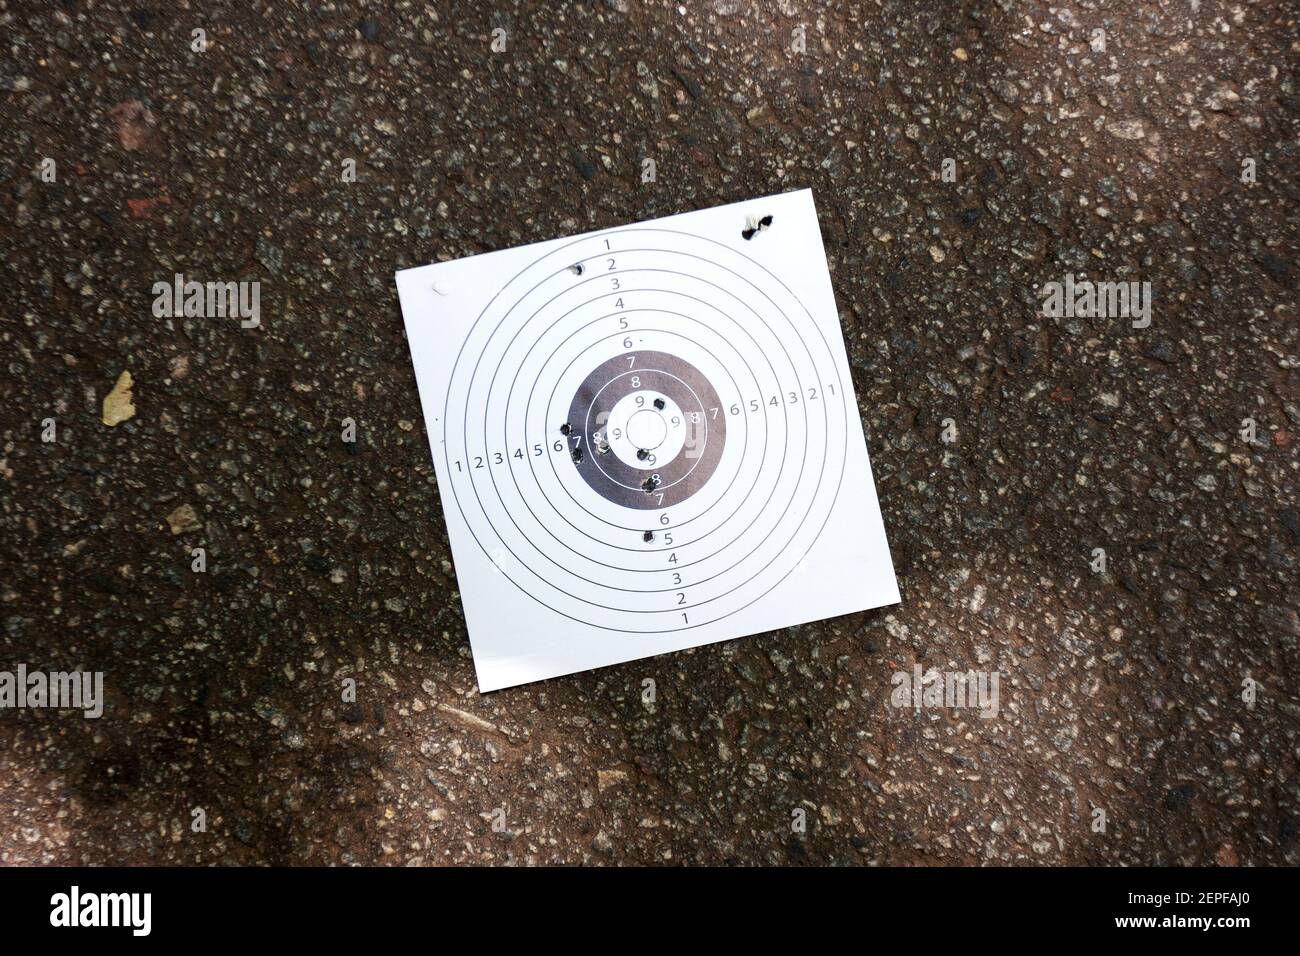 used paper target with bullet holes at urban asphalt background. procrastination and attack concept Stock Photo